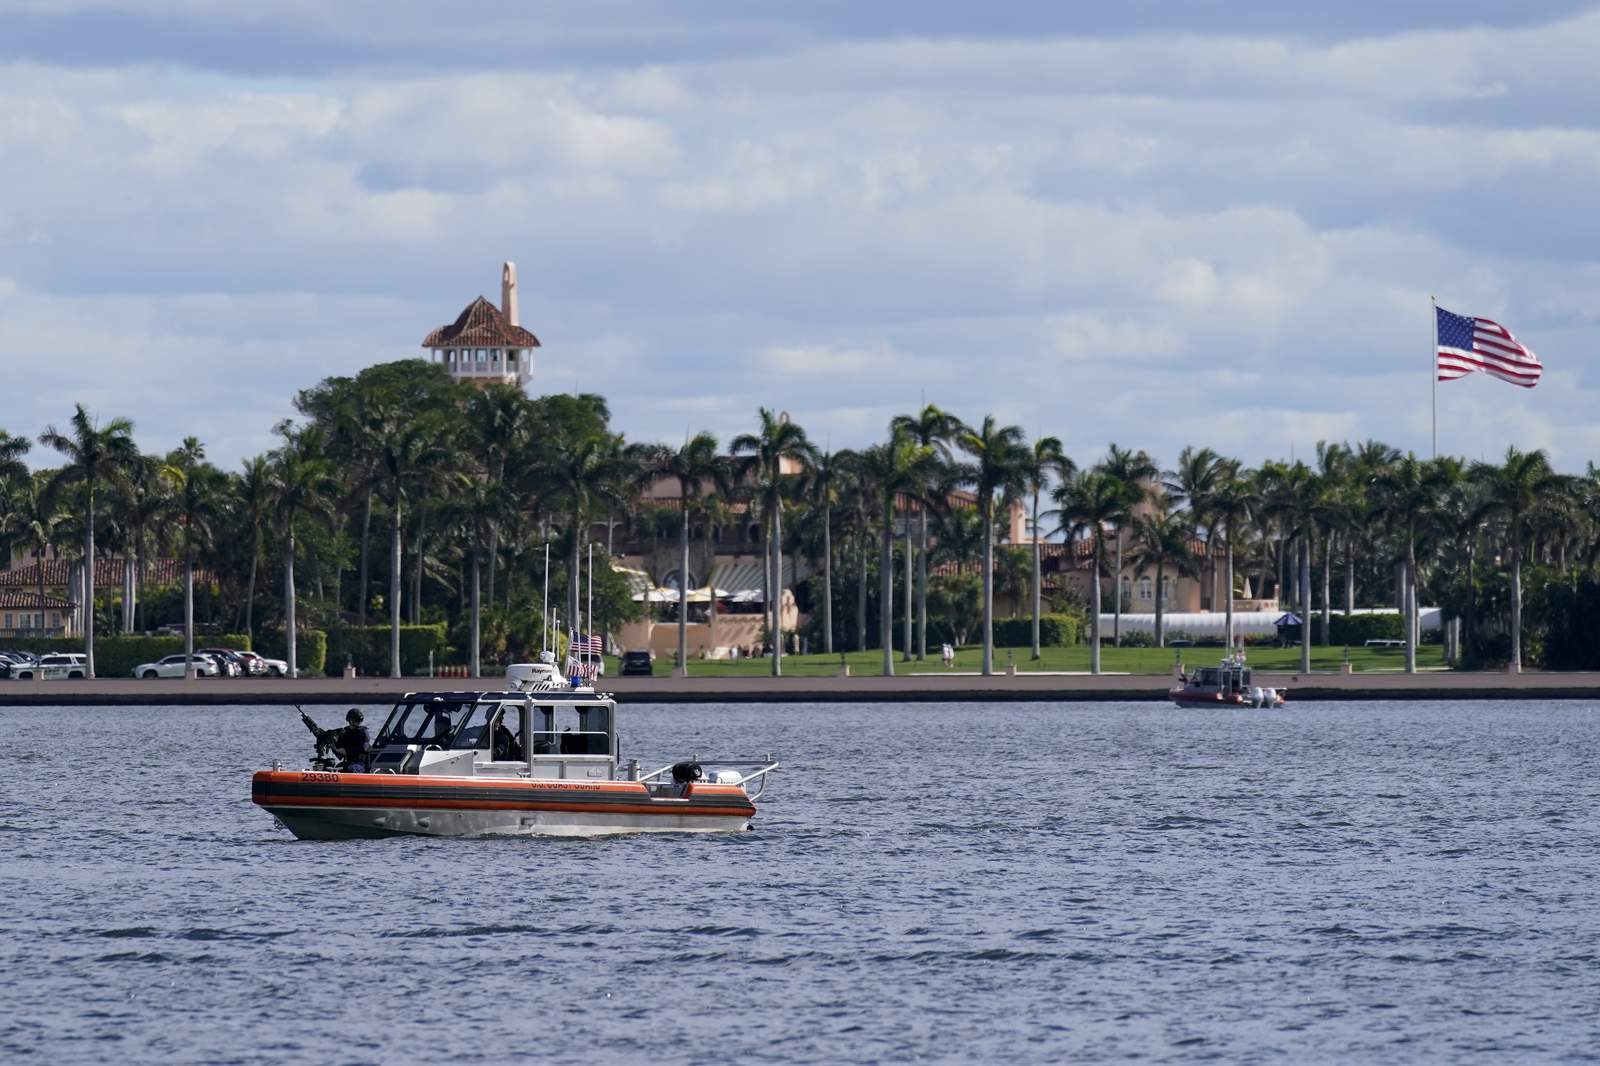 Trump at Mar-a-Lago? Palm Beach has other issues to consider